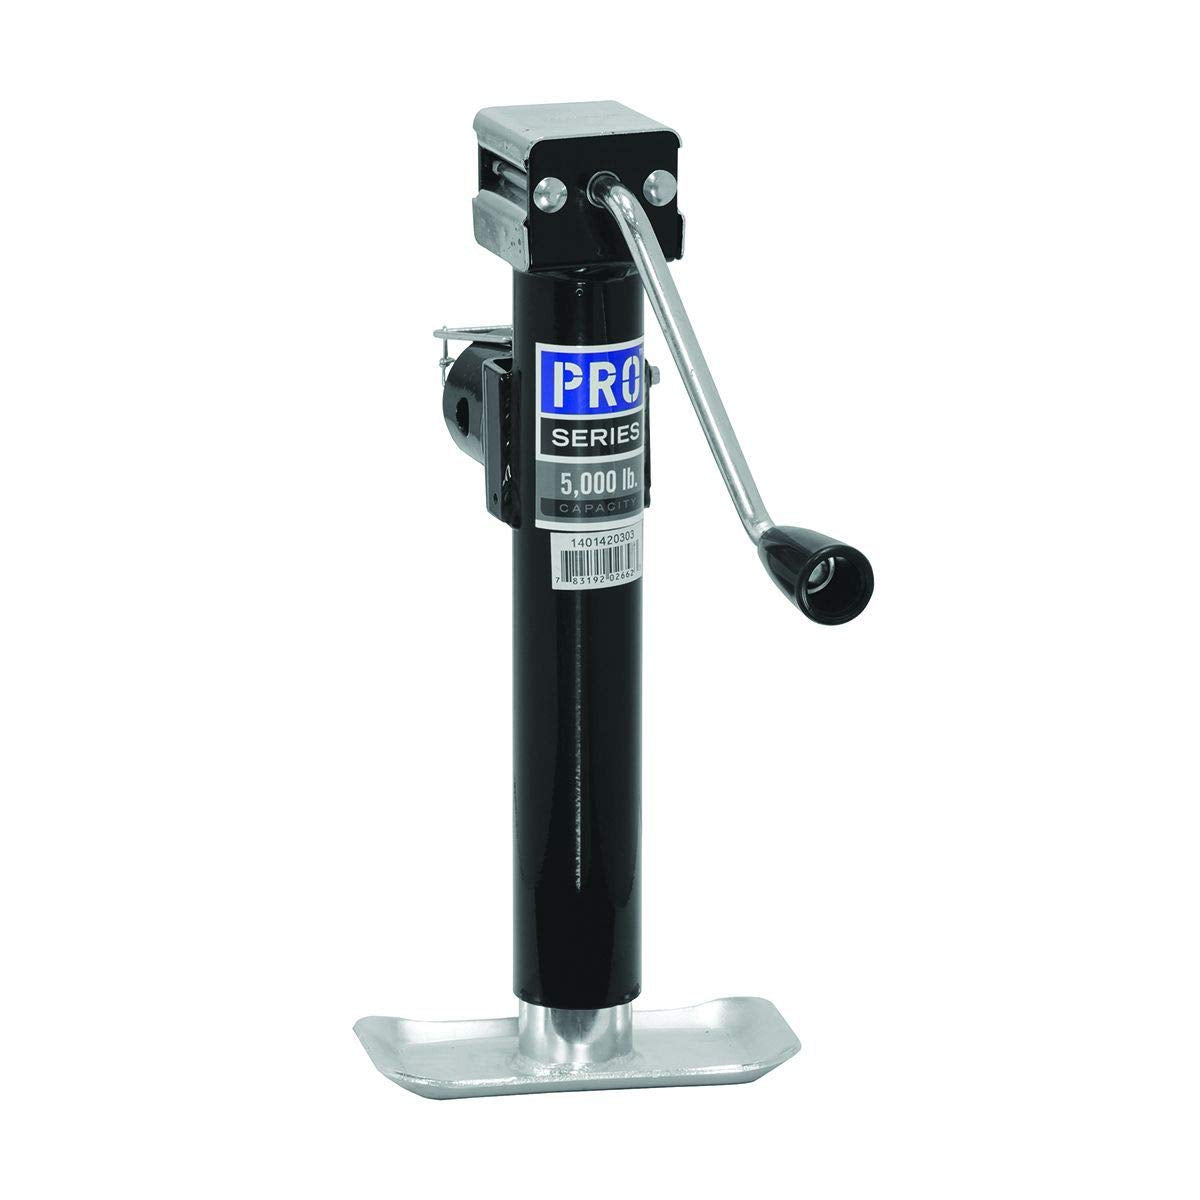 Pro Series | 1401420303 | Trailer Tongue Weld-On Manual Jack